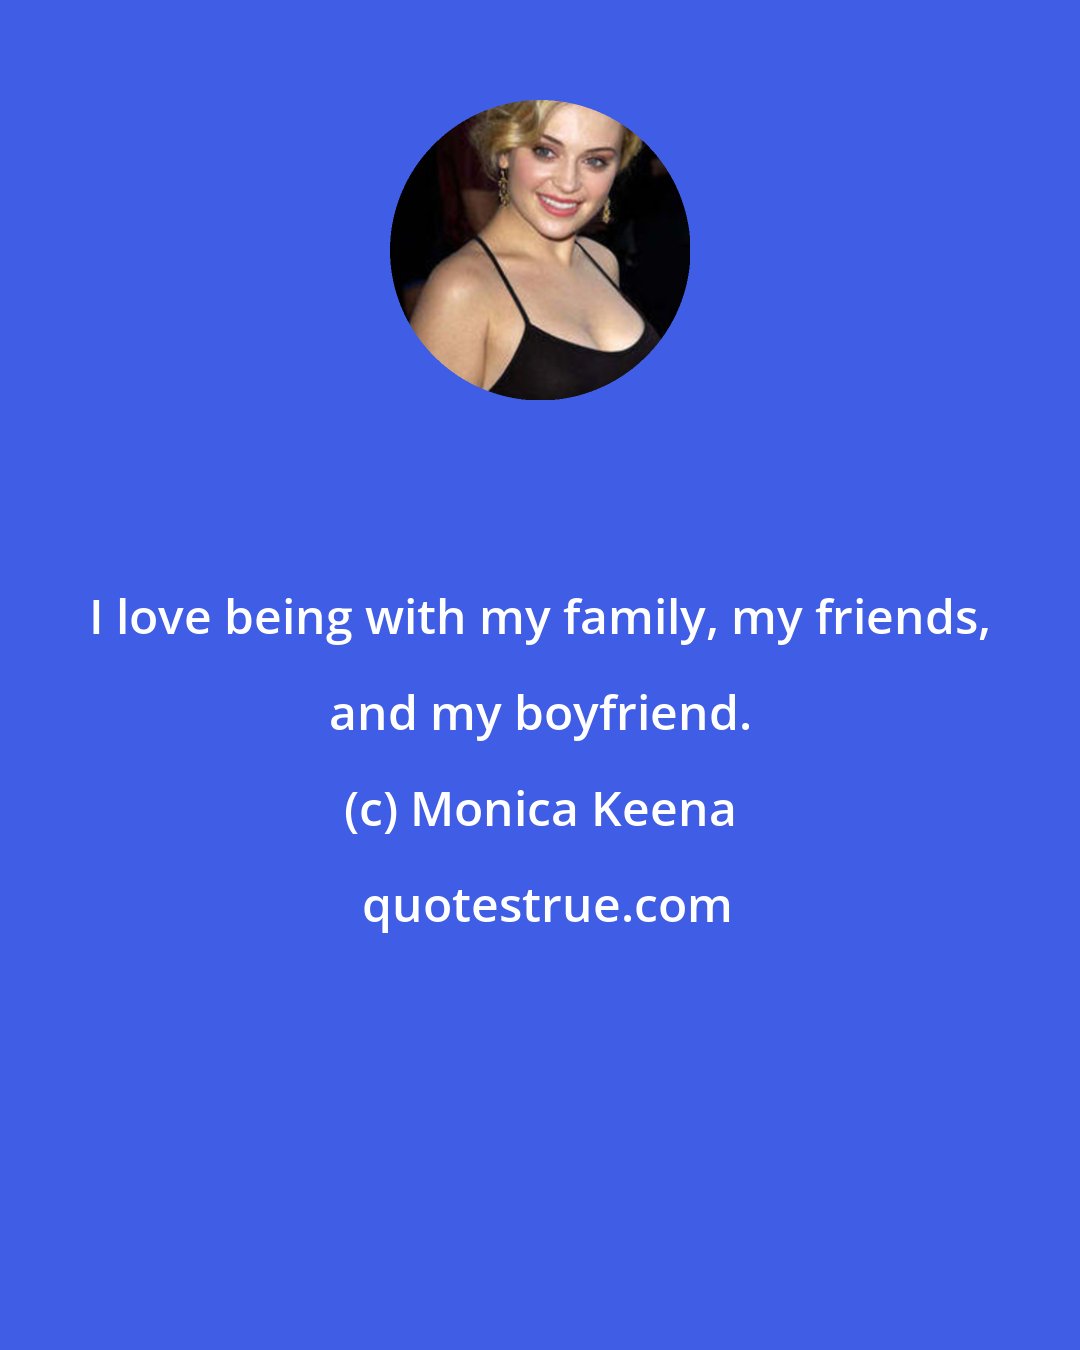 Monica Keena: I love being with my family, my friends, and my boyfriend.